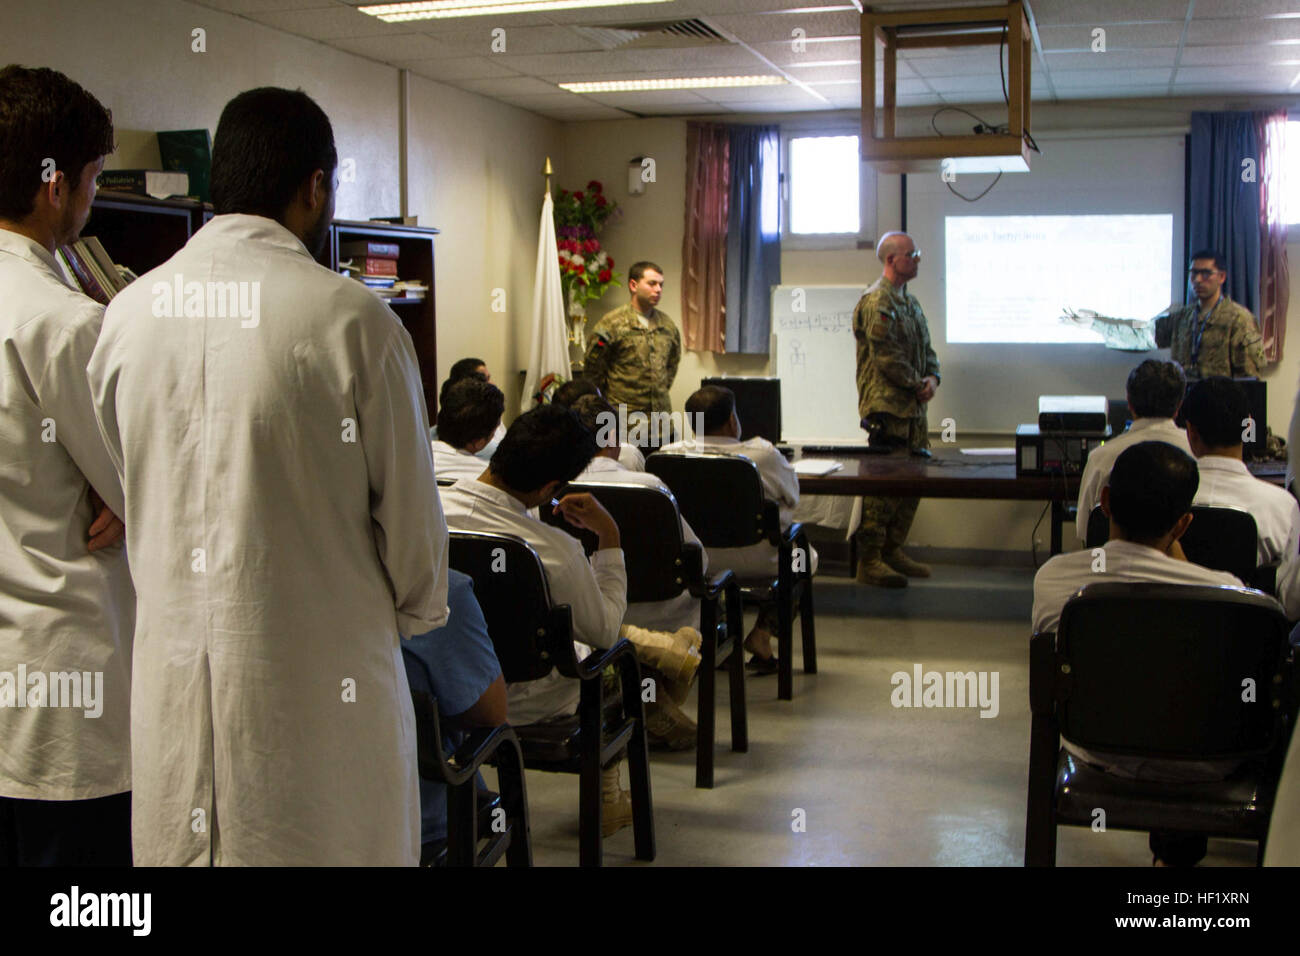 Medical staff of the Kandahar Regional Military Hospital attend a class on electrocardiography taught by two members of the North Atlantic Treaty Organization Role 3 Multinational Medical Unit at Camp Hero, Afghanistan, Feb. 11, 2014.  The first portion of the class was taught by Cmdr. Sean Bryant, as a part of an ongoing educational partnership between KRMH and the MMU. (U.S. Army photo by Cpl. Mariah Best) EKG training brings confidence to KRMH staff 140211-Z-TF878-549 Stock Photo